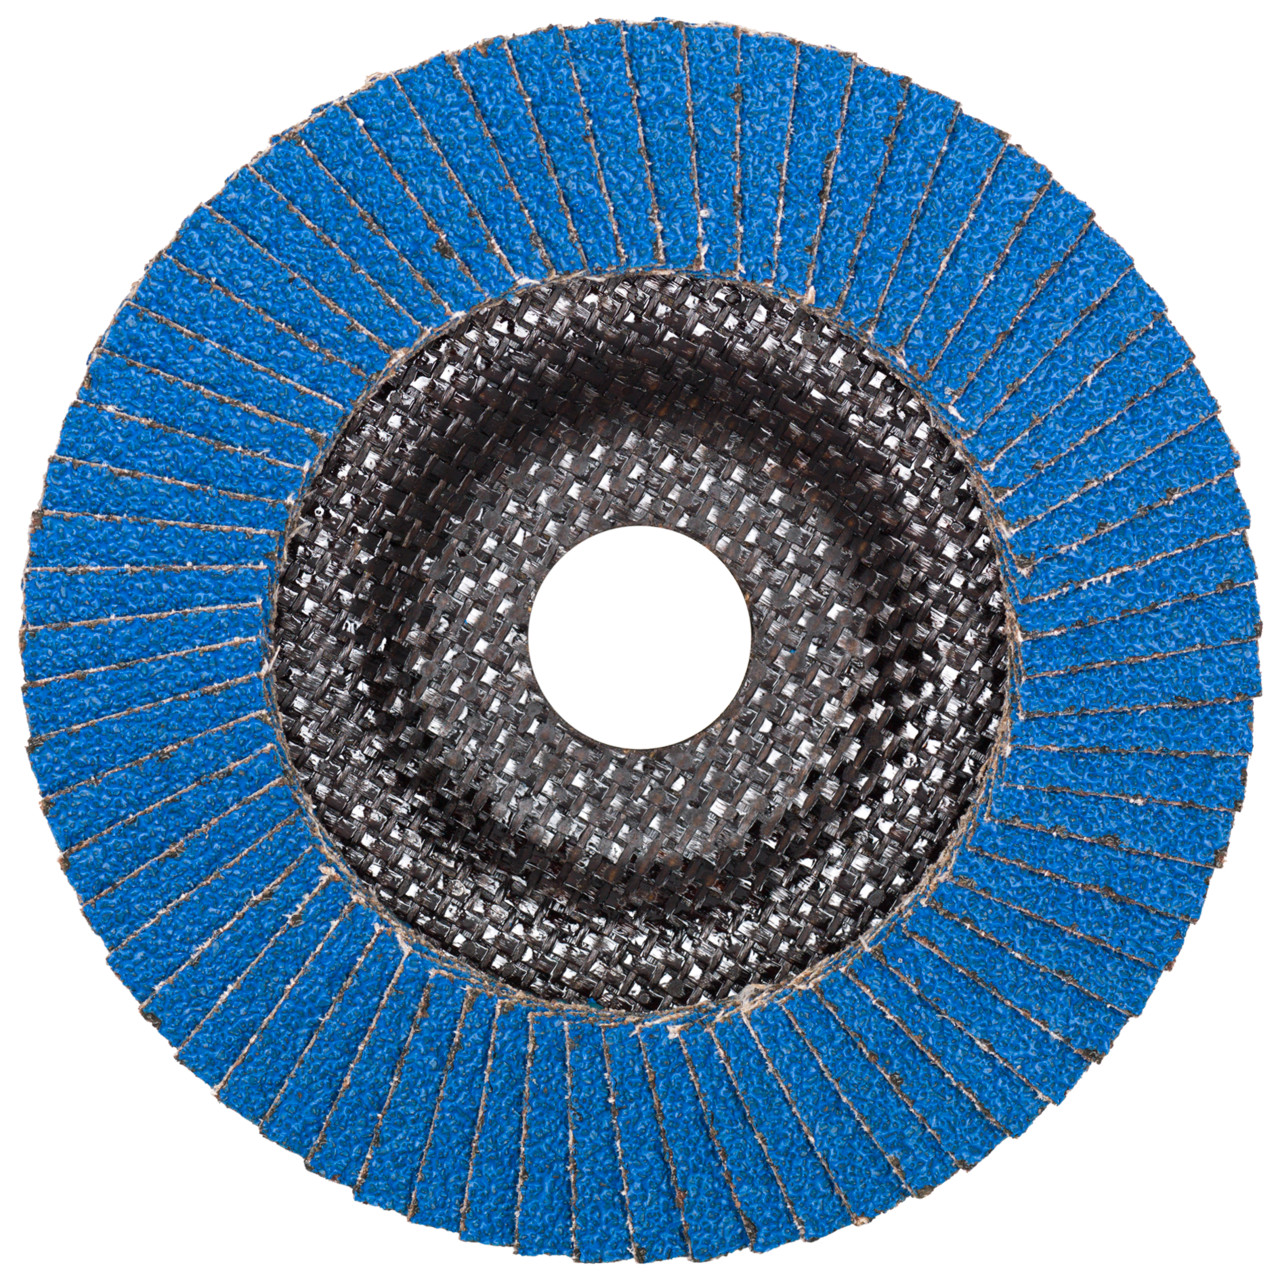 Tyrolit Serrated lock washer DxH 150x22.23 FASTCUT for steel &amp; stainless steel, P60, shape: 28A - straight version (glass fibre carrier body version), Art. 34166365